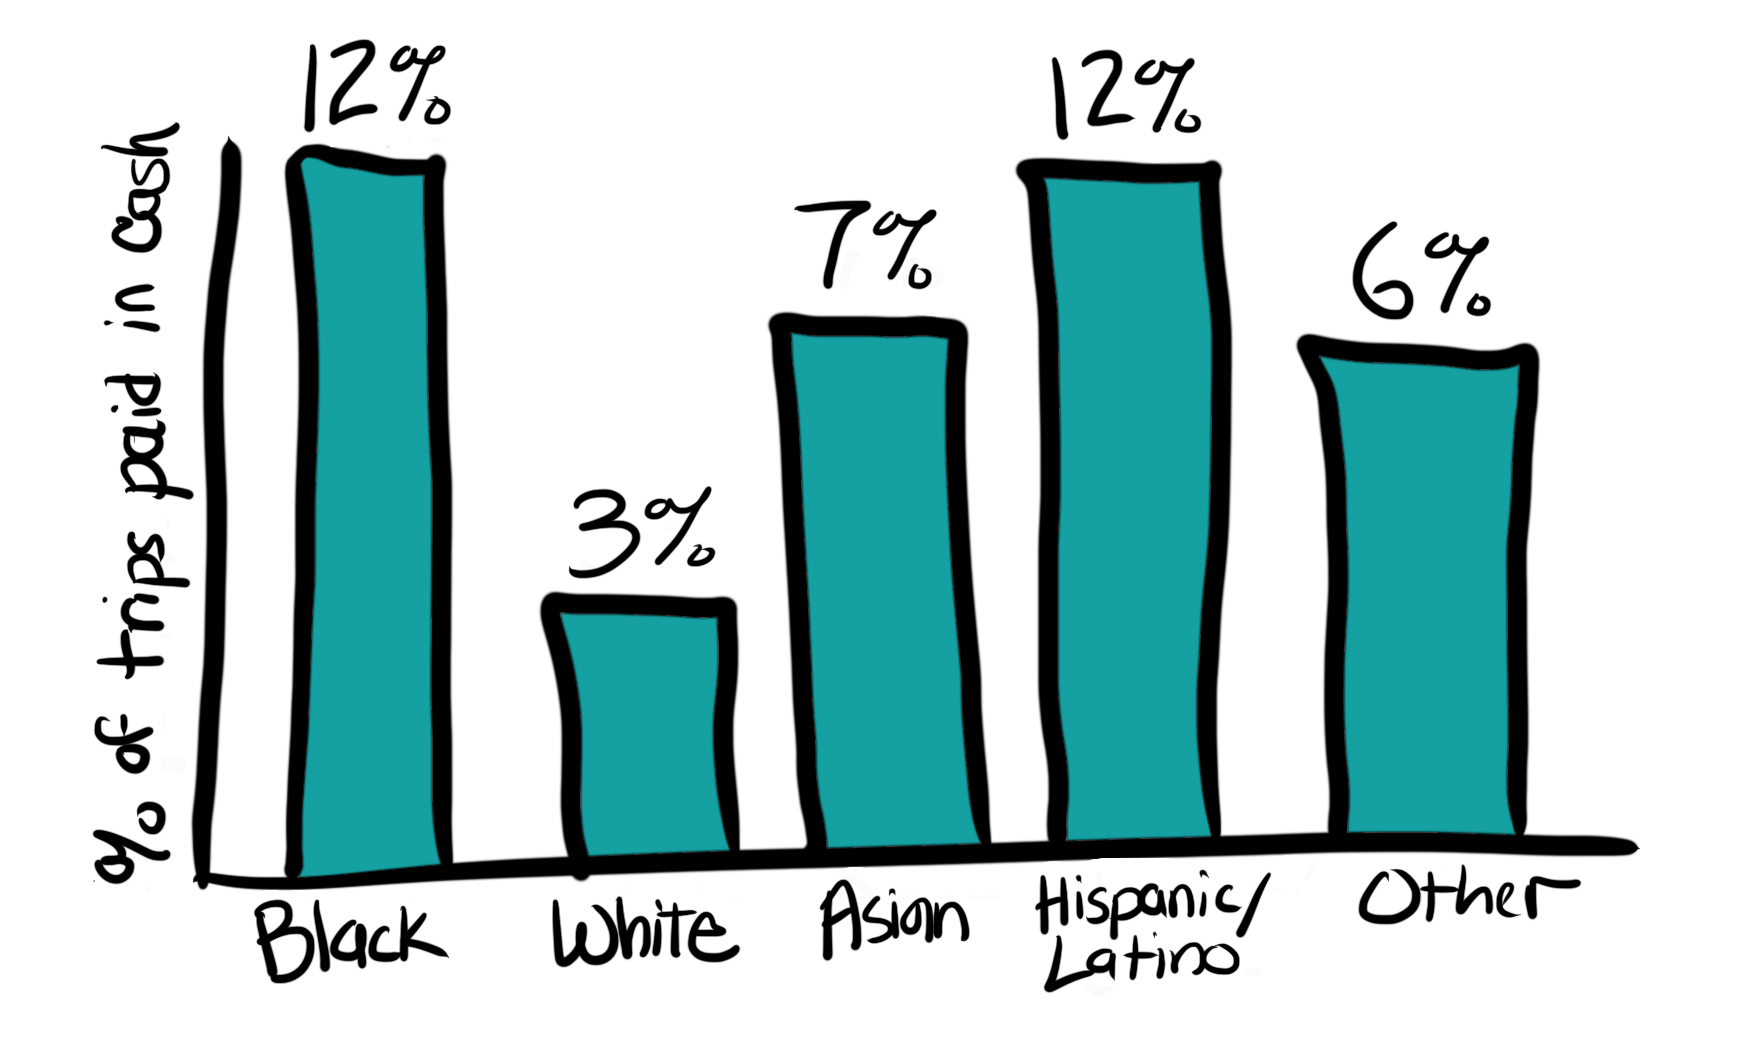 Sketch of a hypothetical bar chart showing percent of cash boardings by race/ethnicity: Black - 12%, White - 3%, Asian - 7%, Hispanic/Latino - 12%, other - 6%